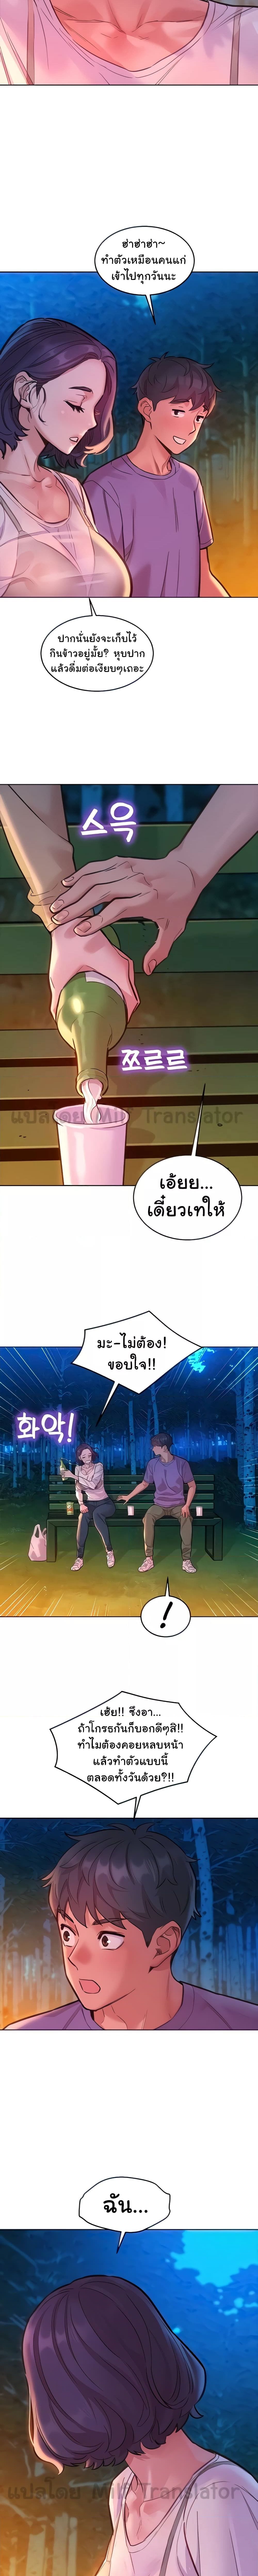 Let’s Hang Out from Today ตอนที่ 38 ภาพ 13